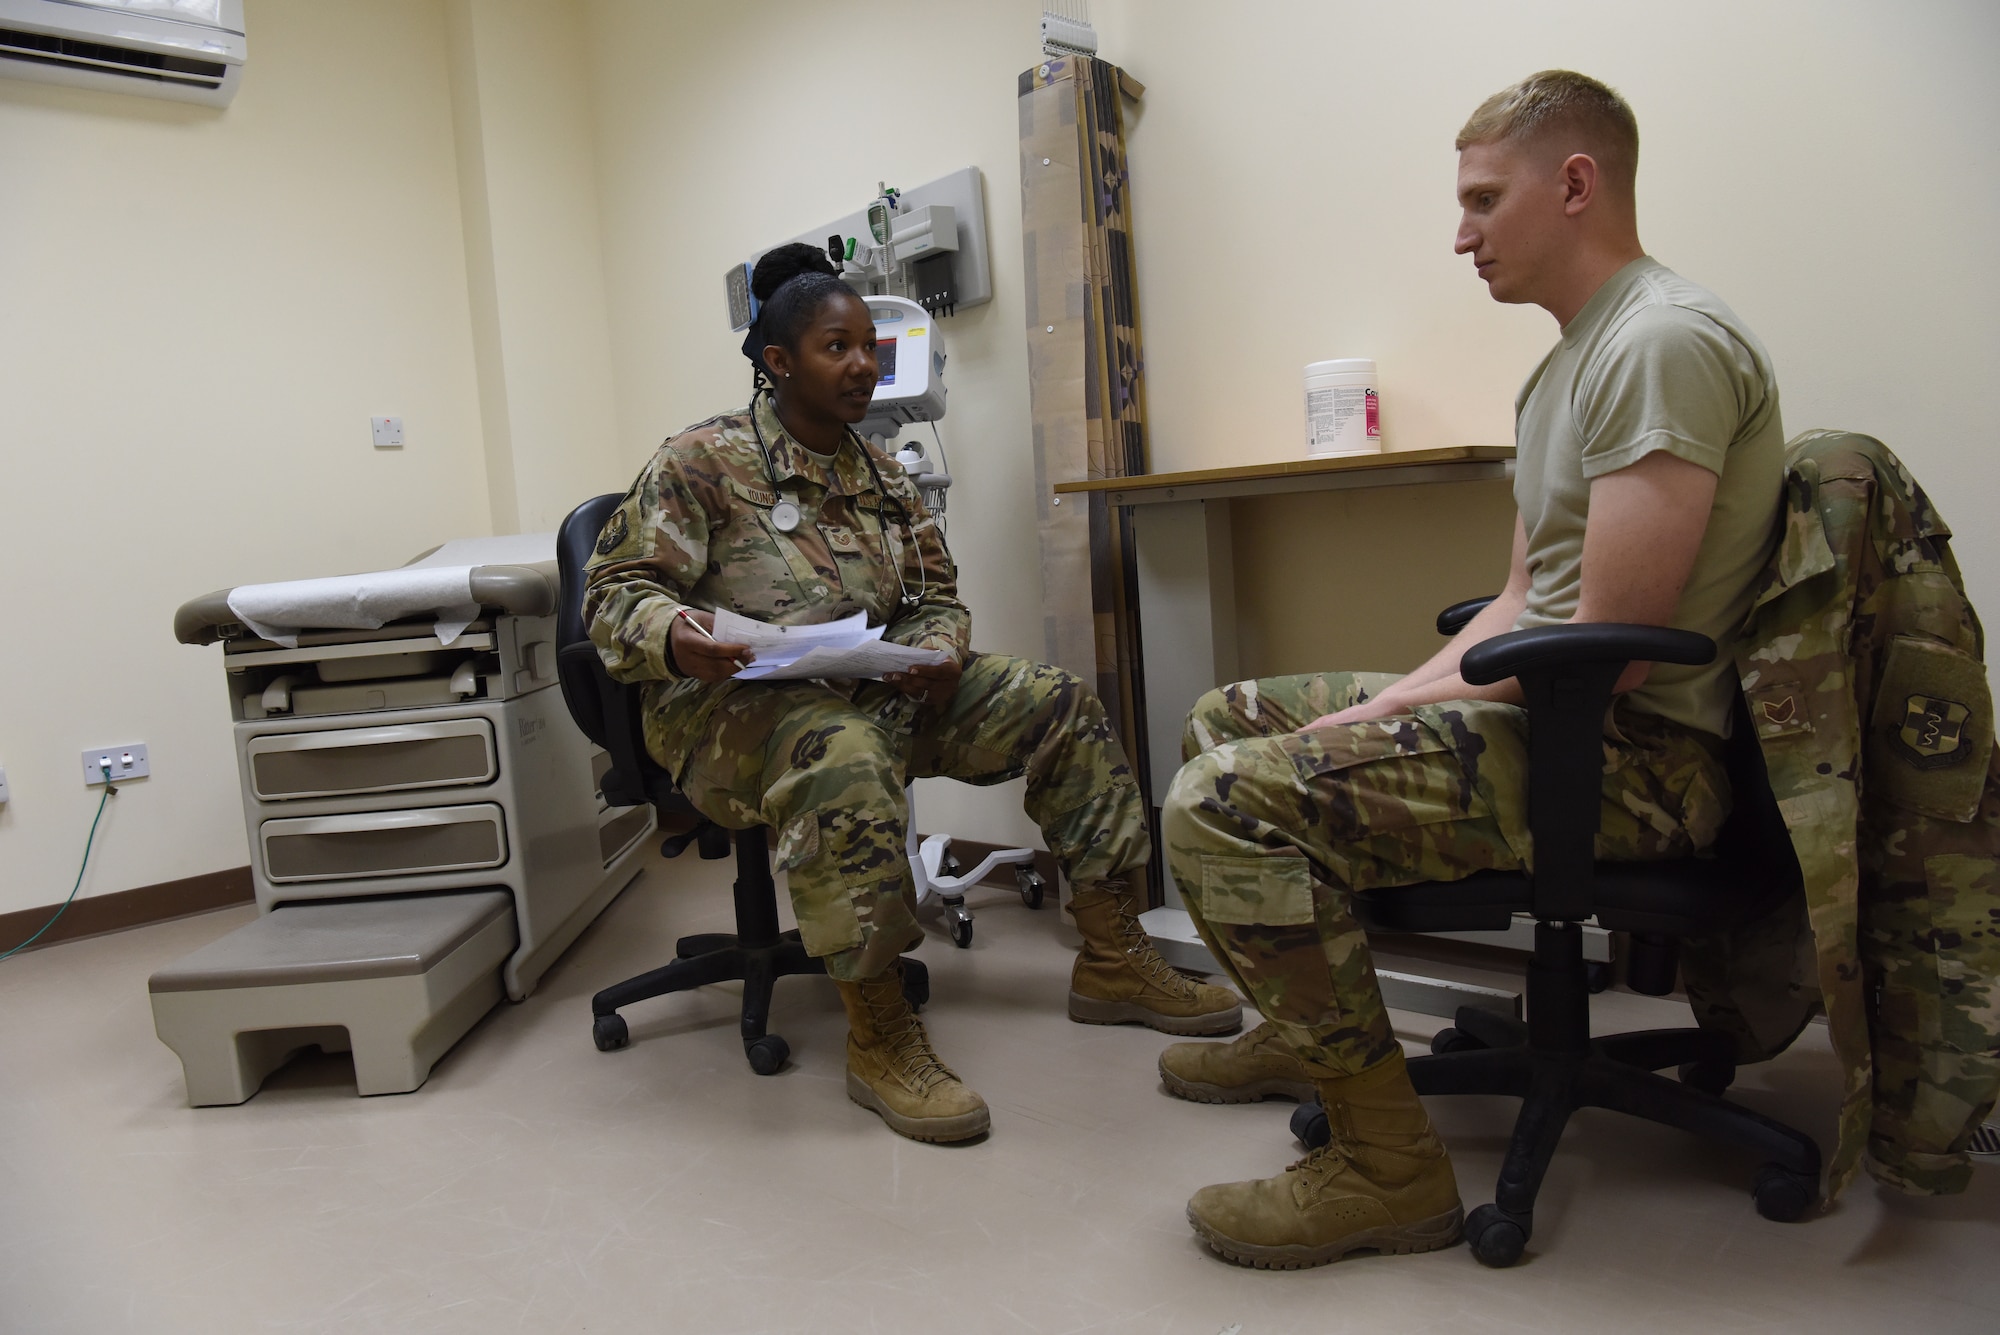 Tech. Sgt. Johnetta Young, 380th Expeditionary Medical Group independent medical technician, performs an evaluation of a simulated patient during the public health exercise at Al Dhafra Air Base, United Arab Emirates, Feb 18-22, 2019.